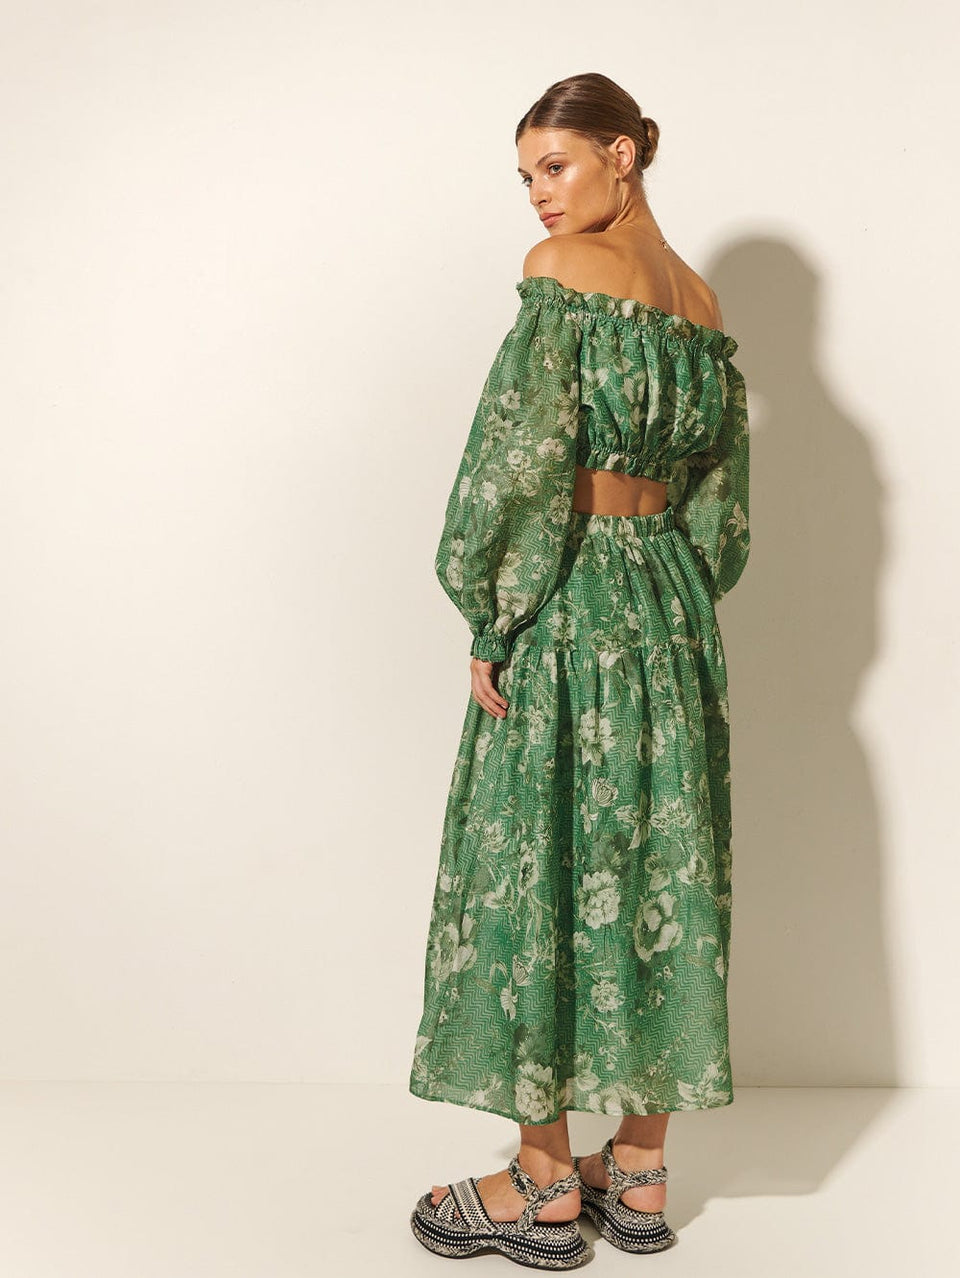 Studio model wears KIVARI Khalo Crop Top: A green floral off-the-shoulder top with full-length blouson sleeves and elasticated bust, waist and sleeve details.